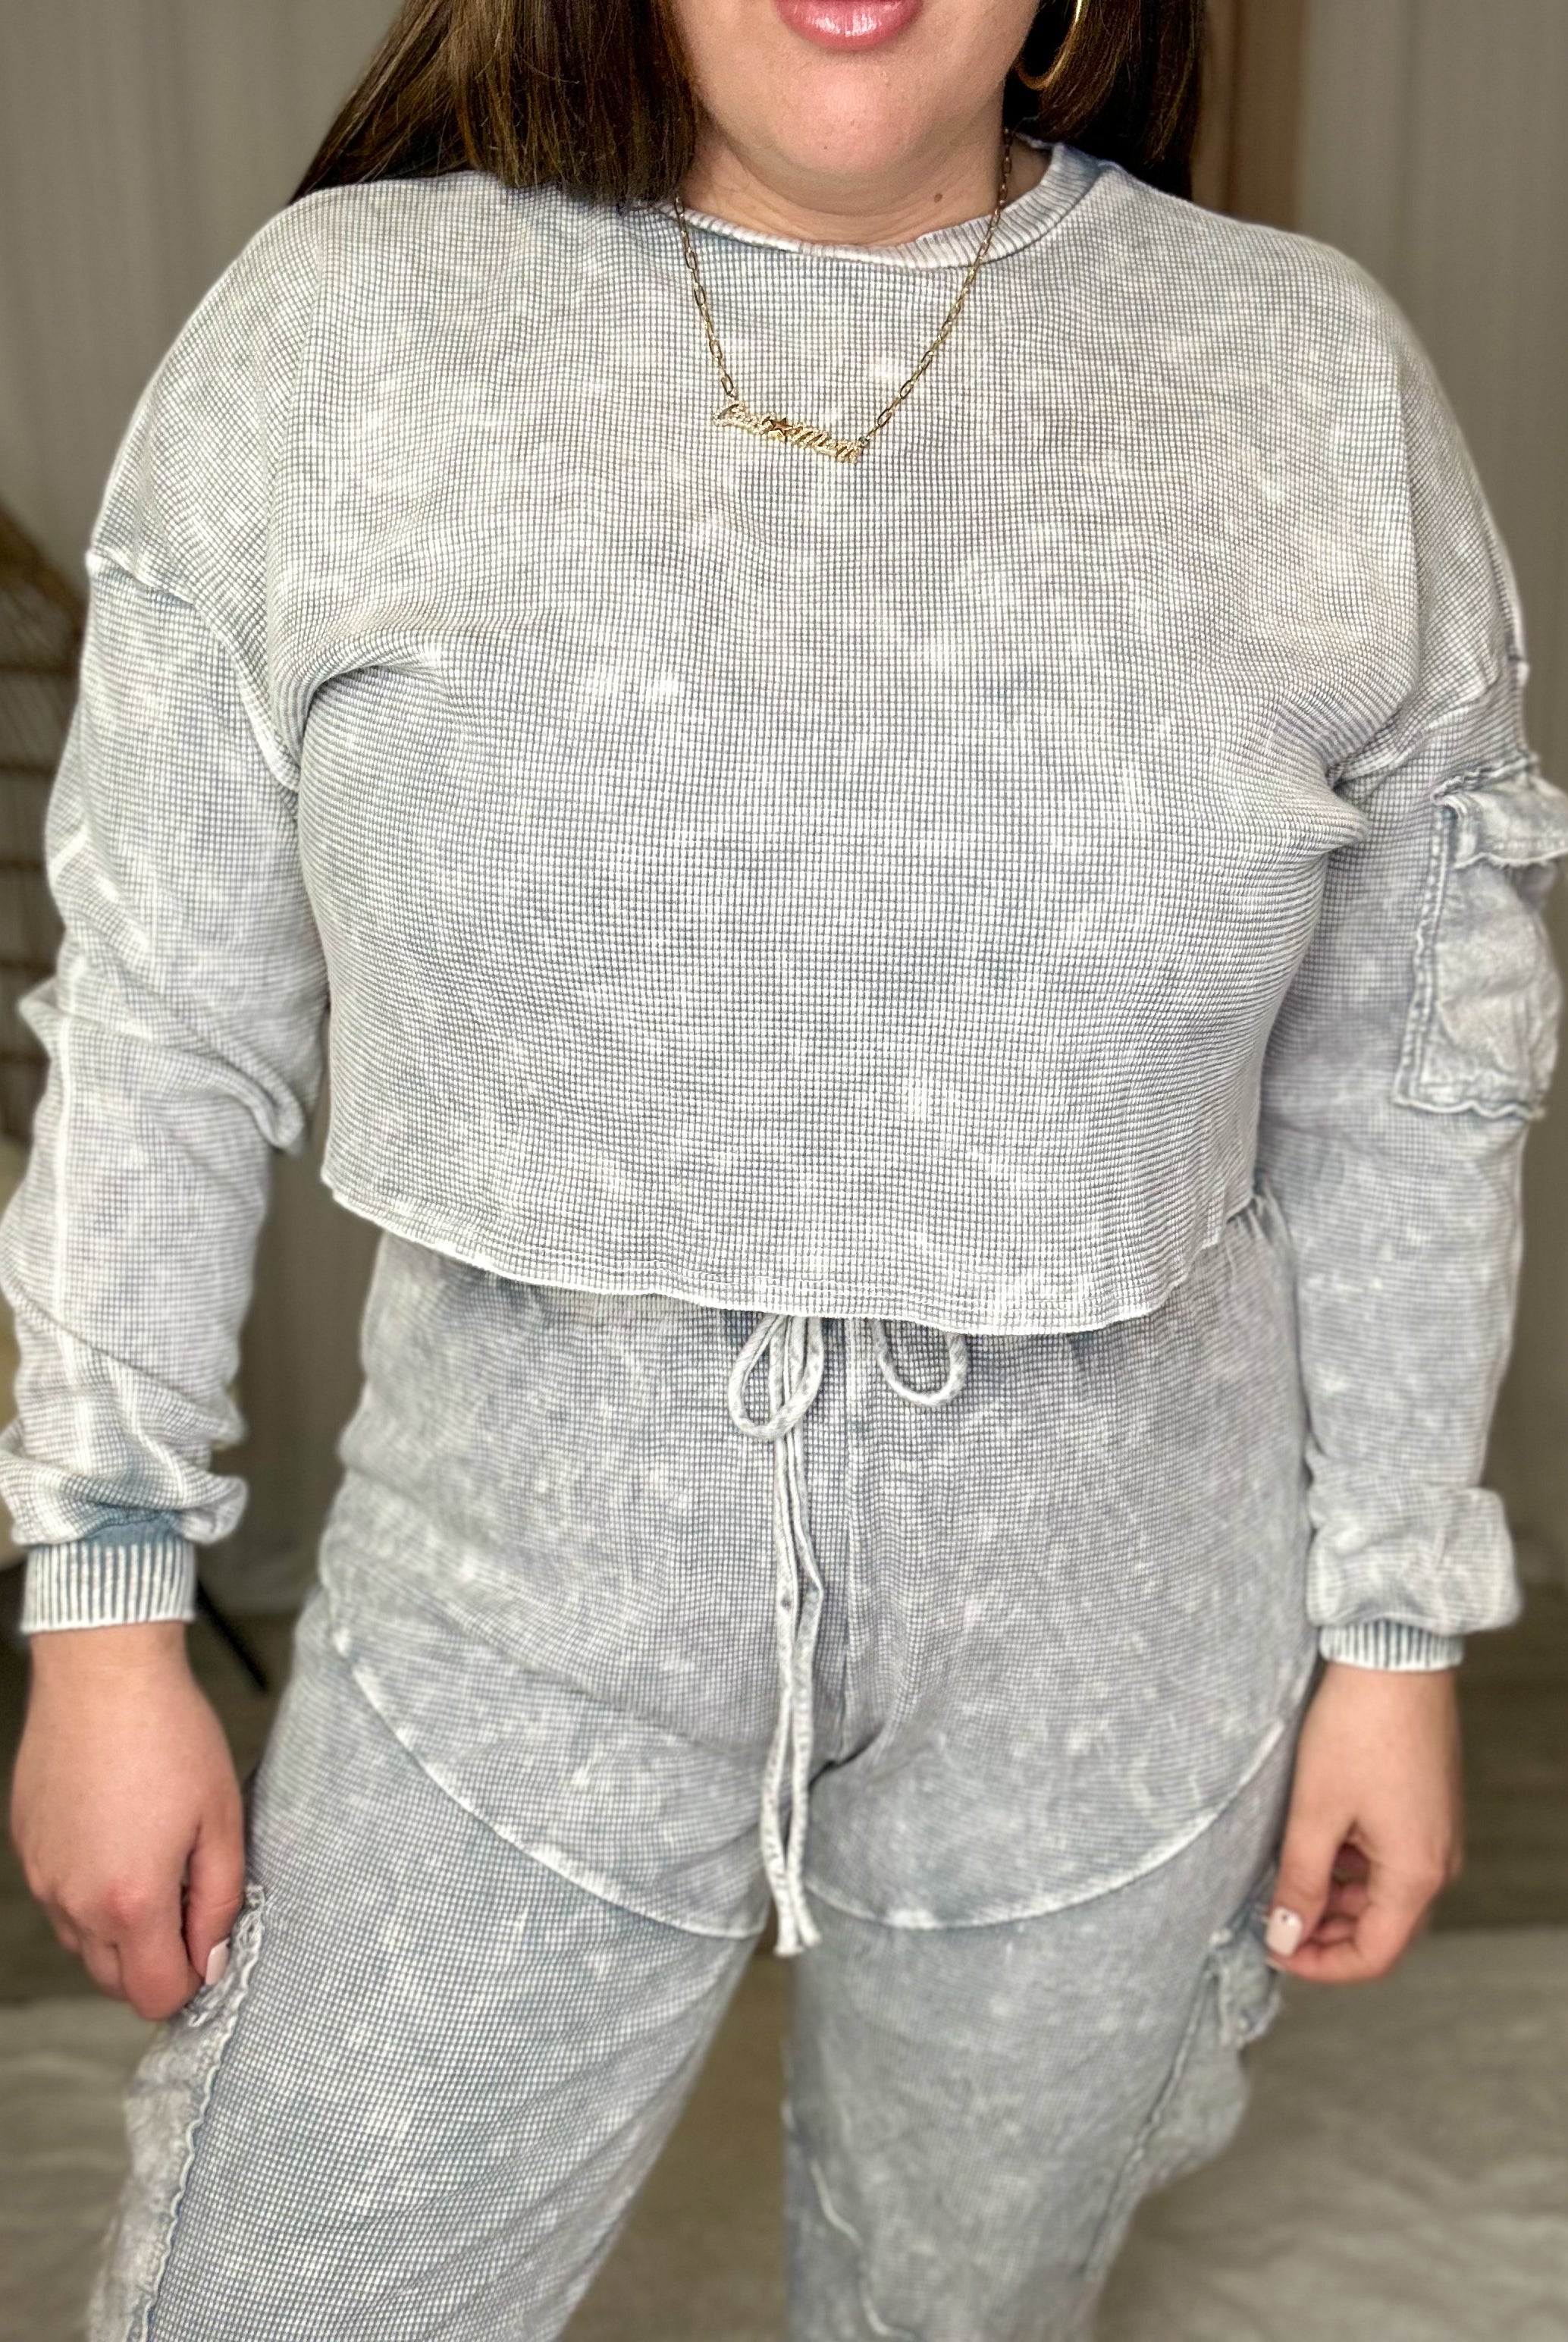 RESTOCK: On a Roll Long Sleeve Top-120 Long Sleeve Tops-J. Her-Heathered Boho Boutique, Women's Fashion and Accessories in Palmetto, FL